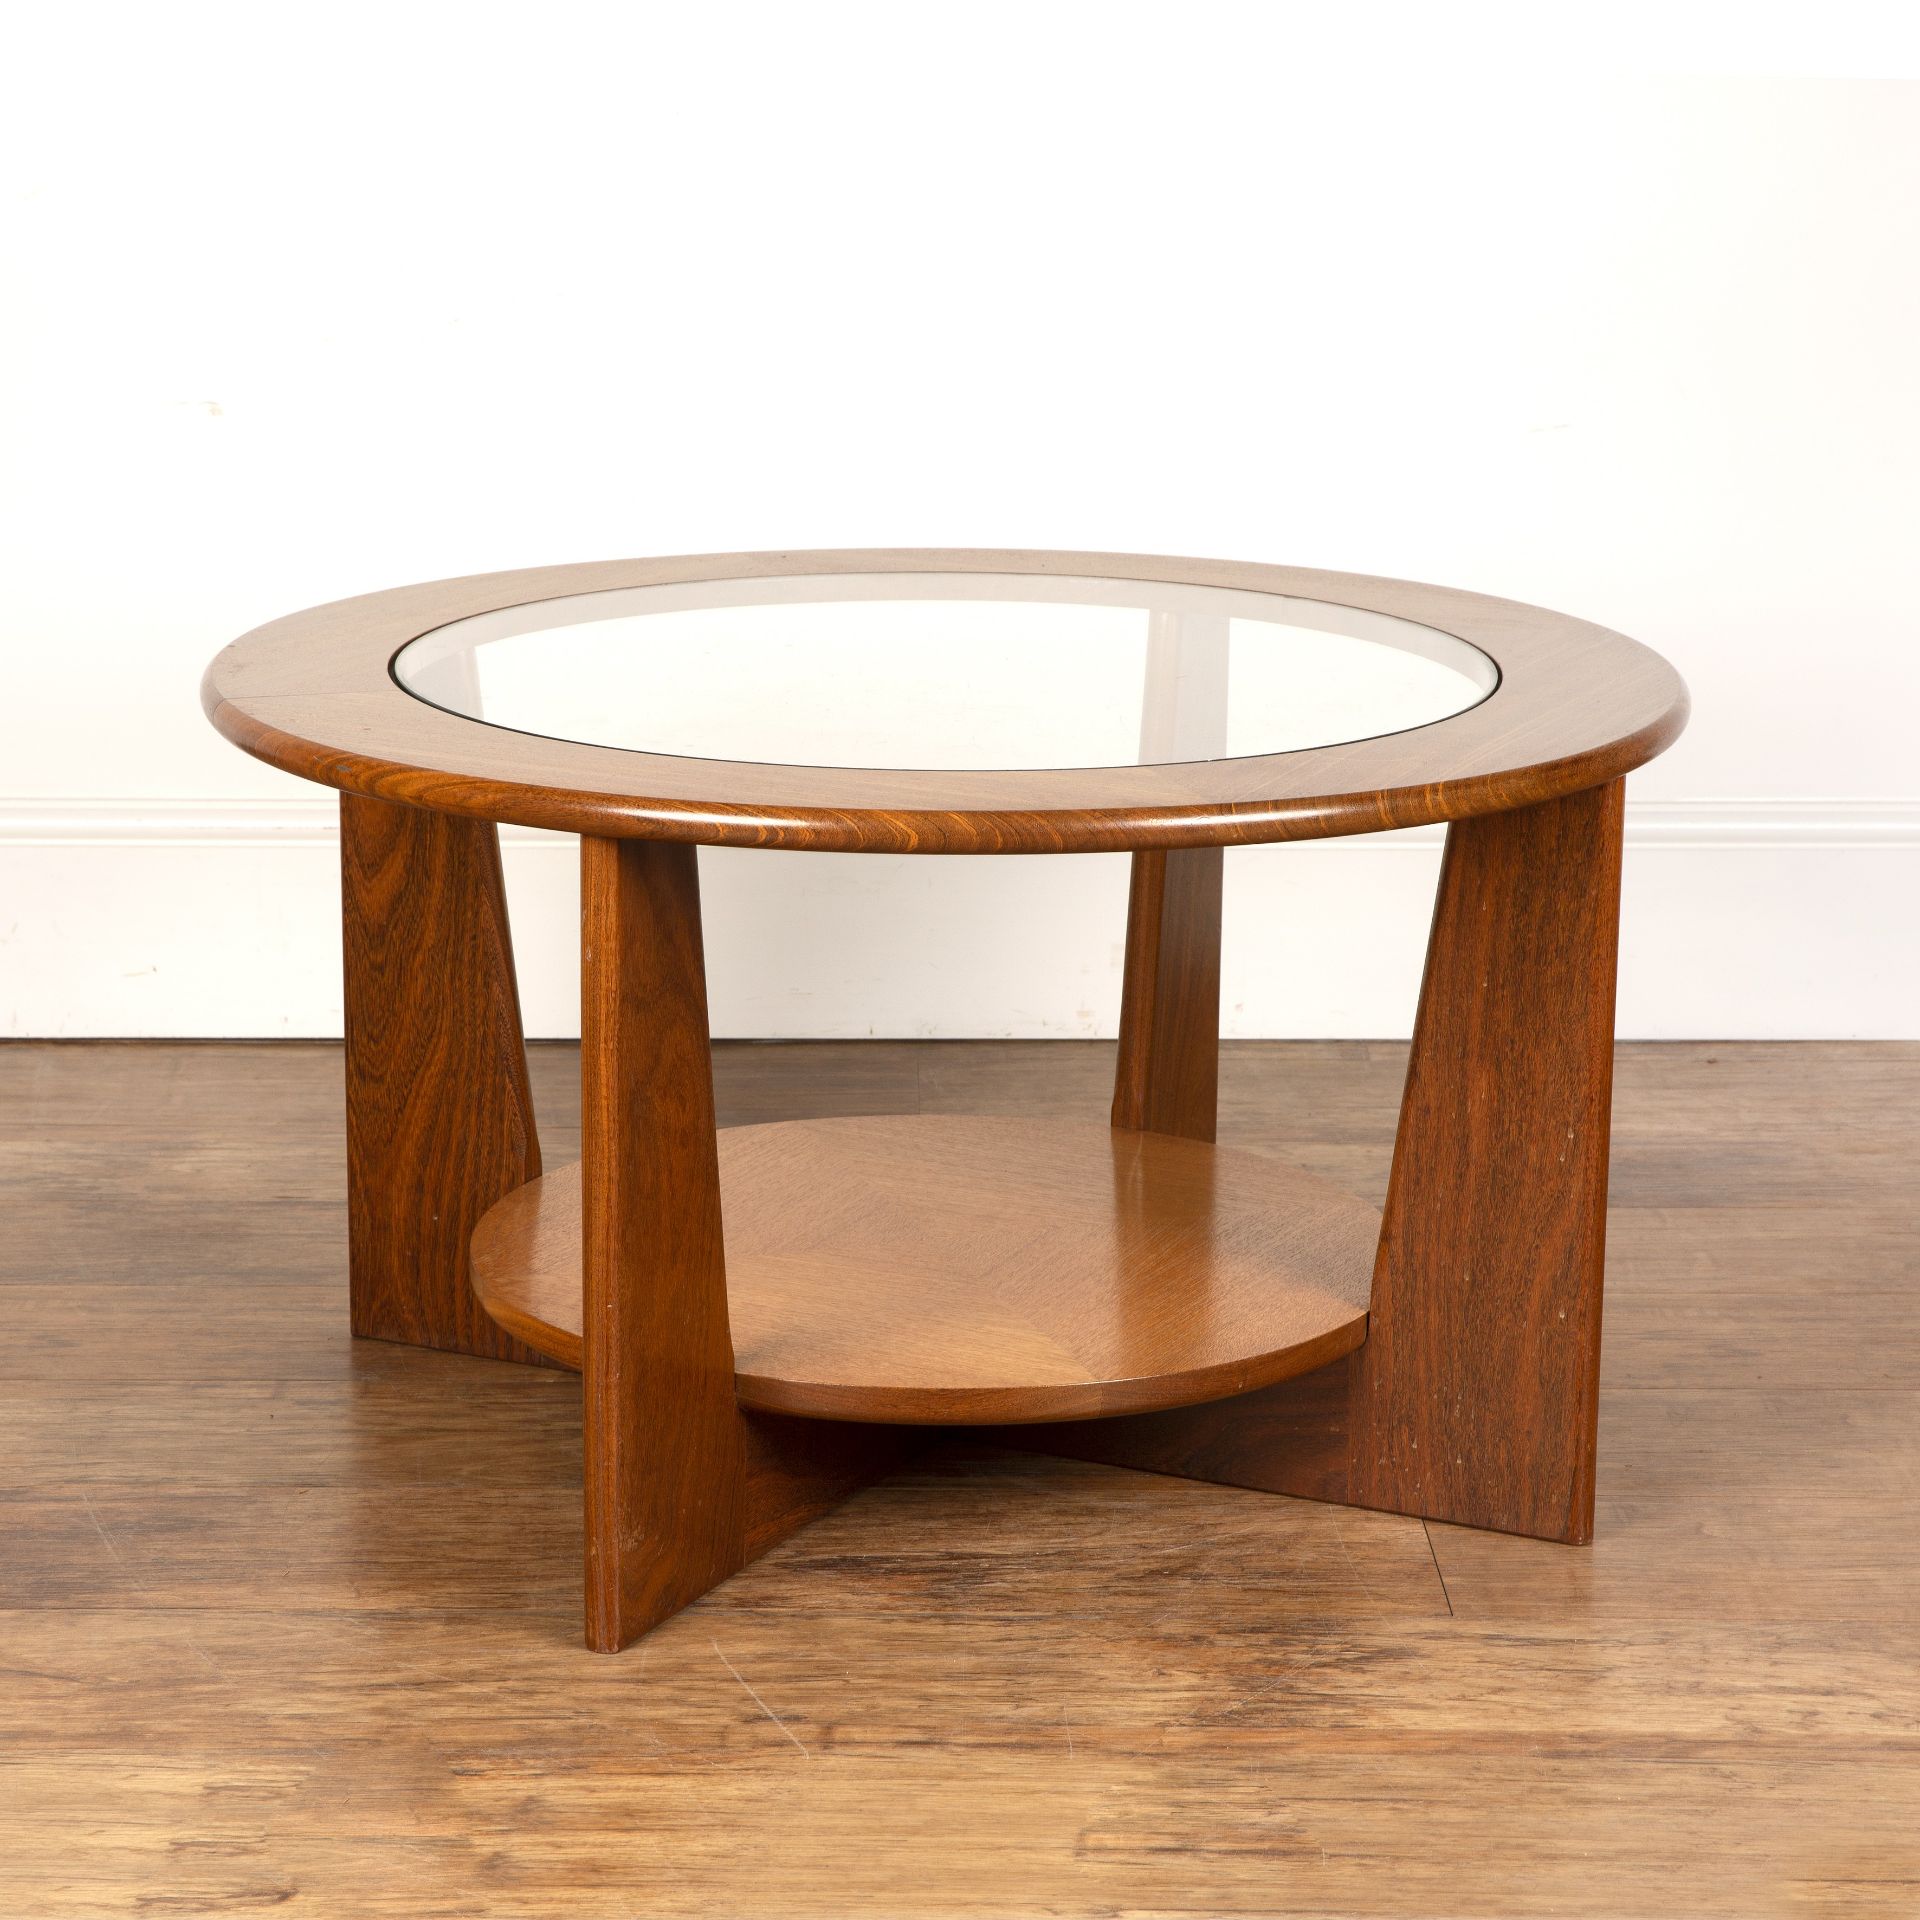 Attributed to G-plan teak, circular coffee table with glass inset top, unmarked, 77.5cm wide x - Image 2 of 5